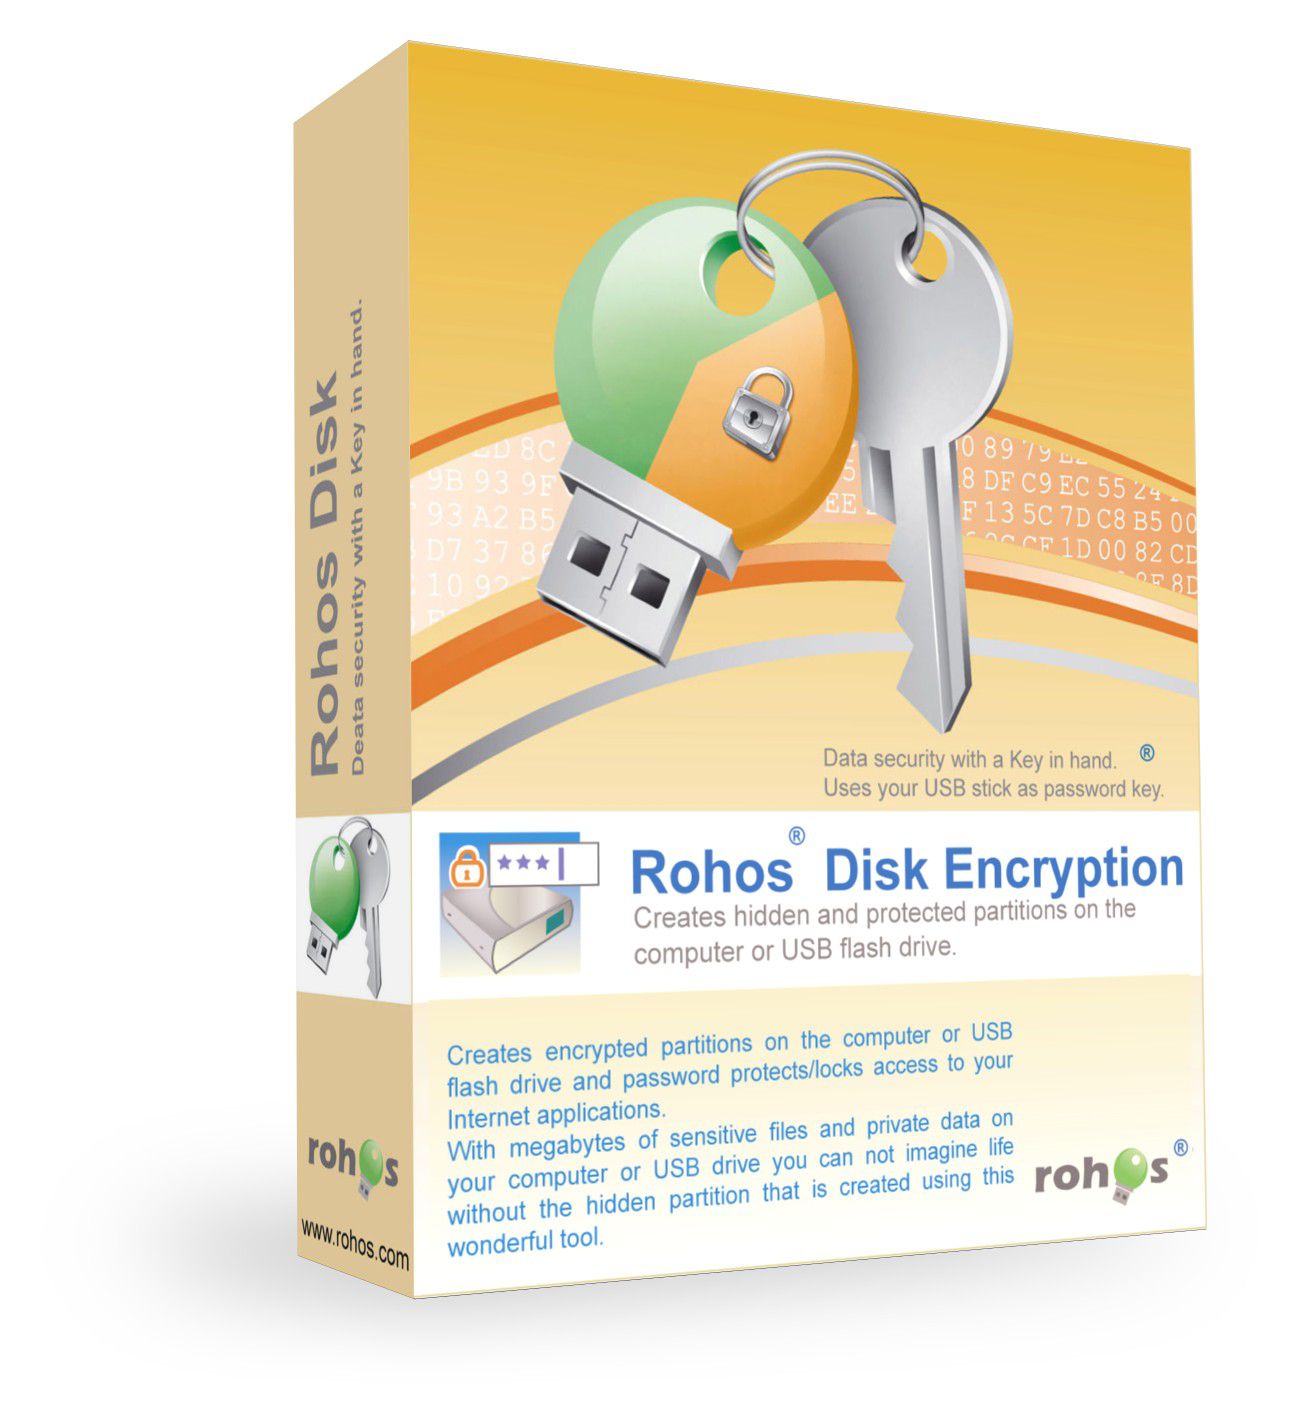 download the new version for ios Rohos Disk Encryption 3.3